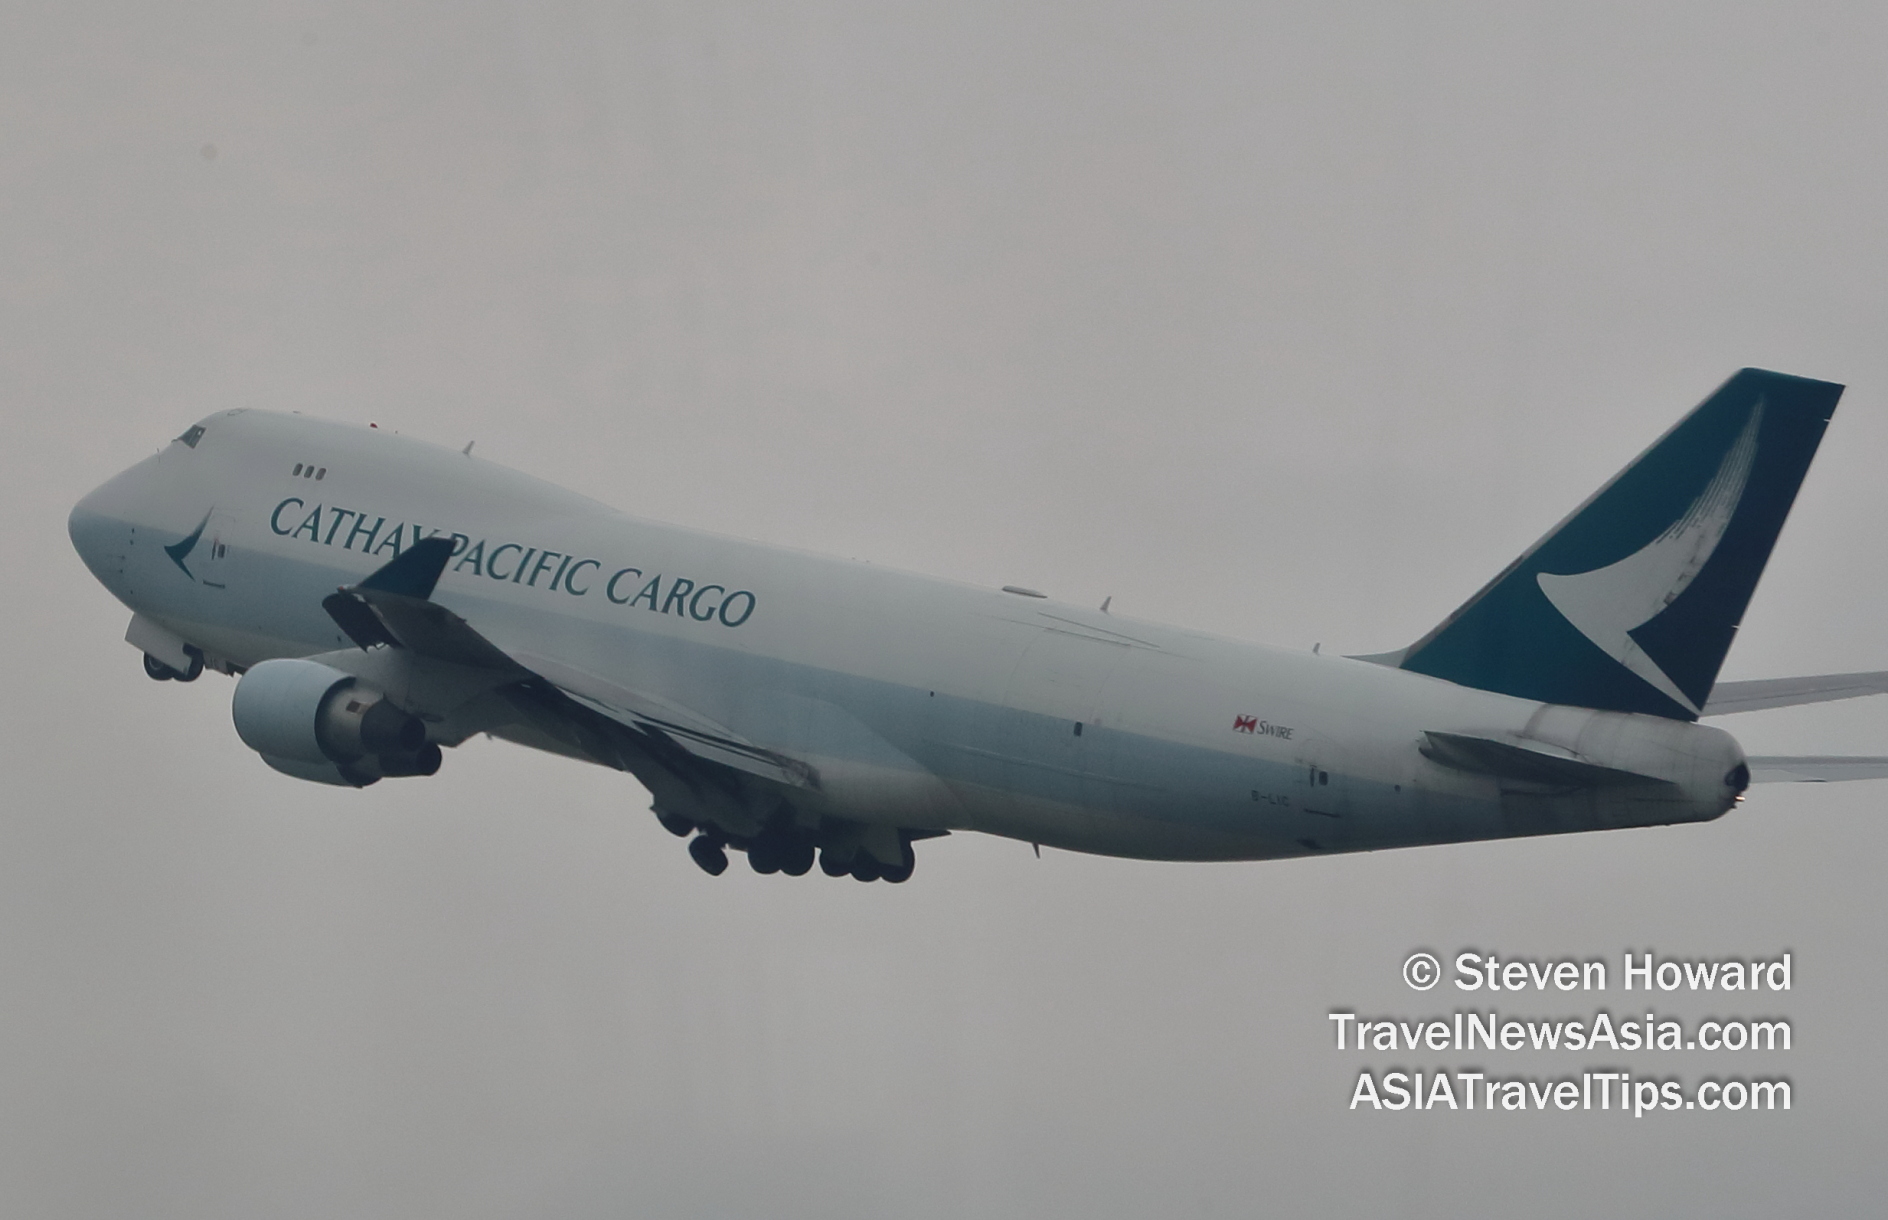 Cathay Pacific Boeing 747-4F reg: B-LIC. Picture by Steven Howard of TravelNewsAsia.com Click to enlarge.